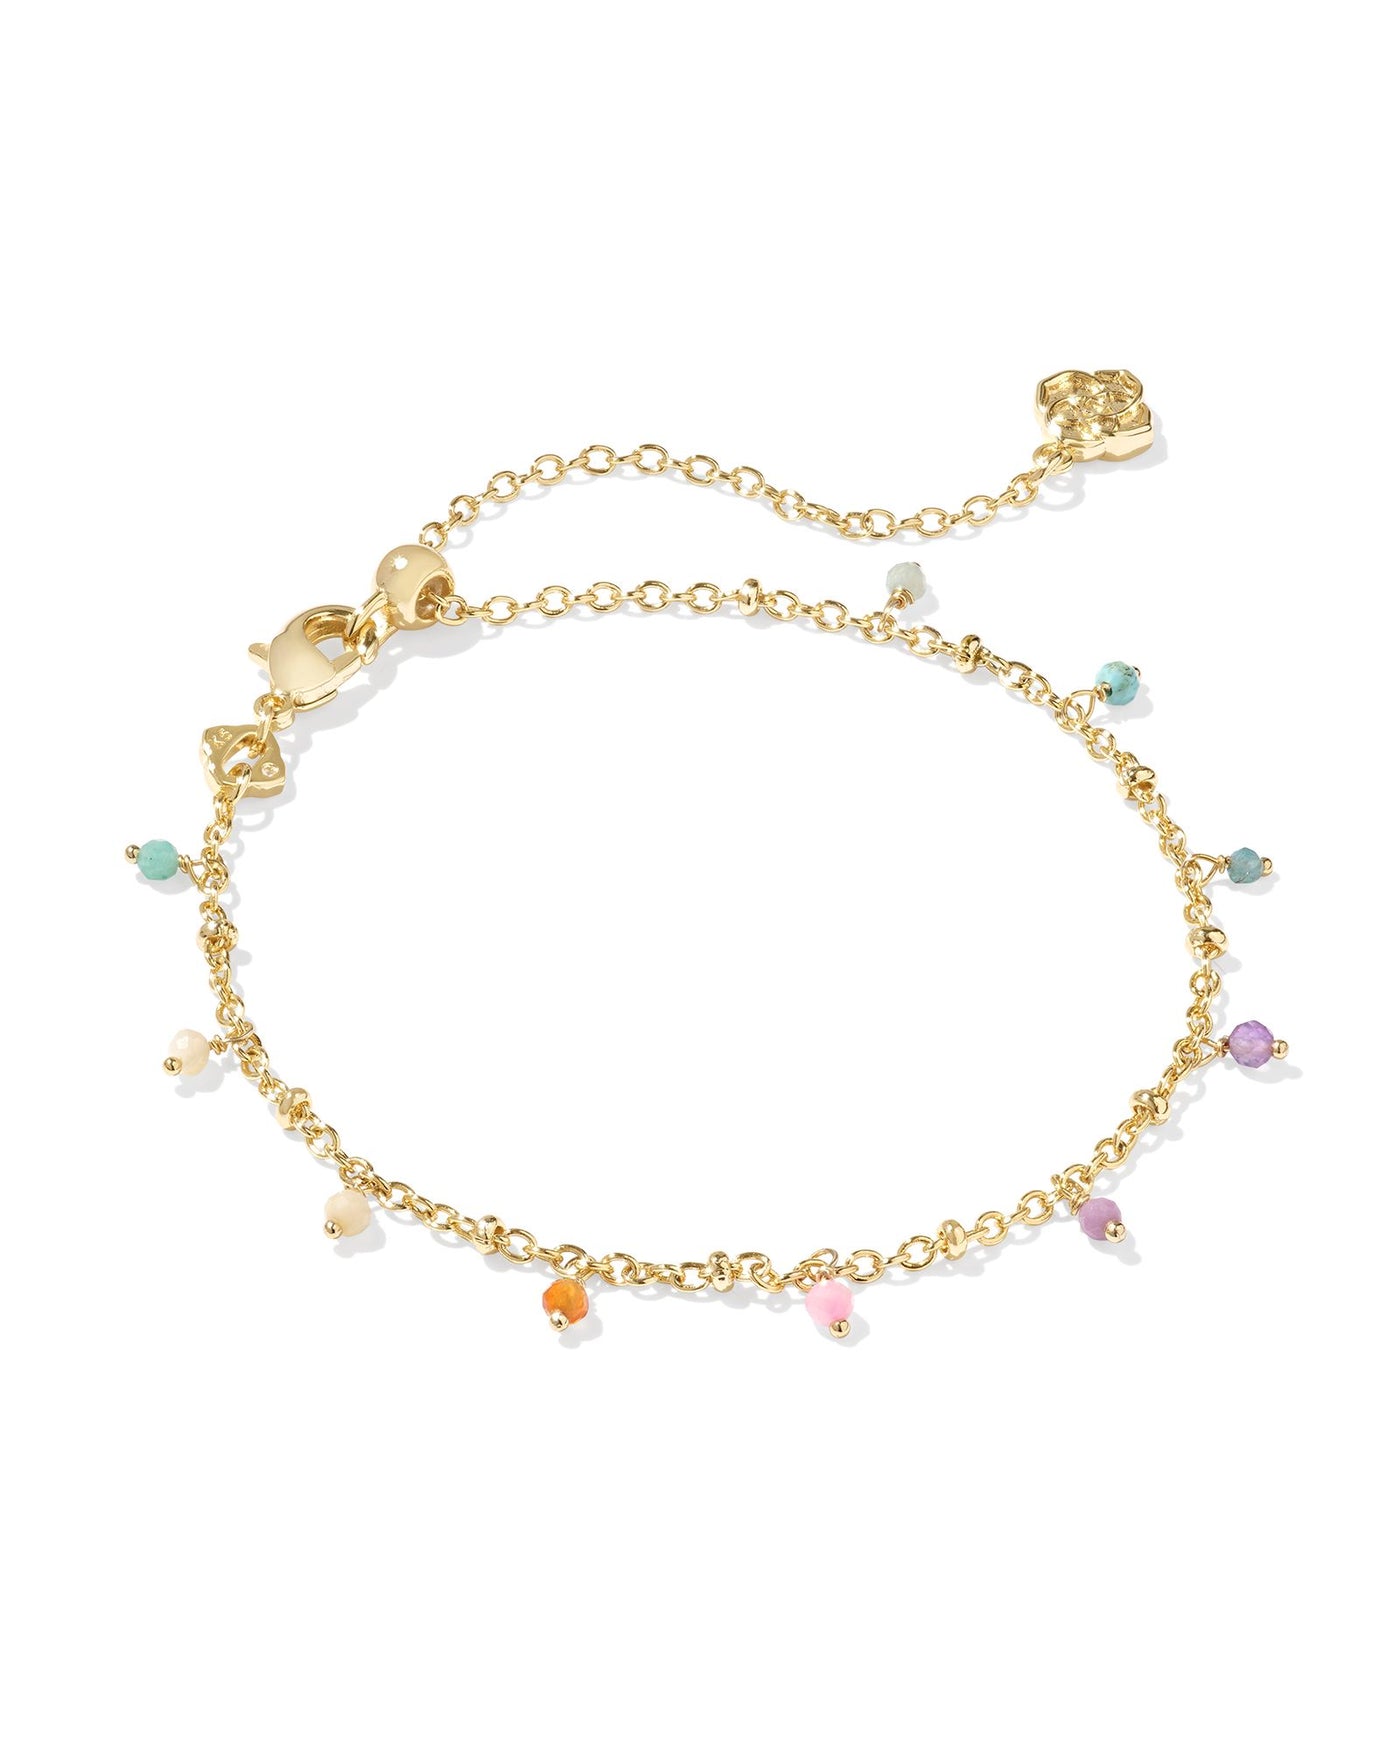 Kendra Scott Camry Bead Delicate Chain Bracelet-Bracelets-Kendra Scott-Market Street Nest, Fashionable Clothing, Shoes and Home Décor Located in Mabank, TX